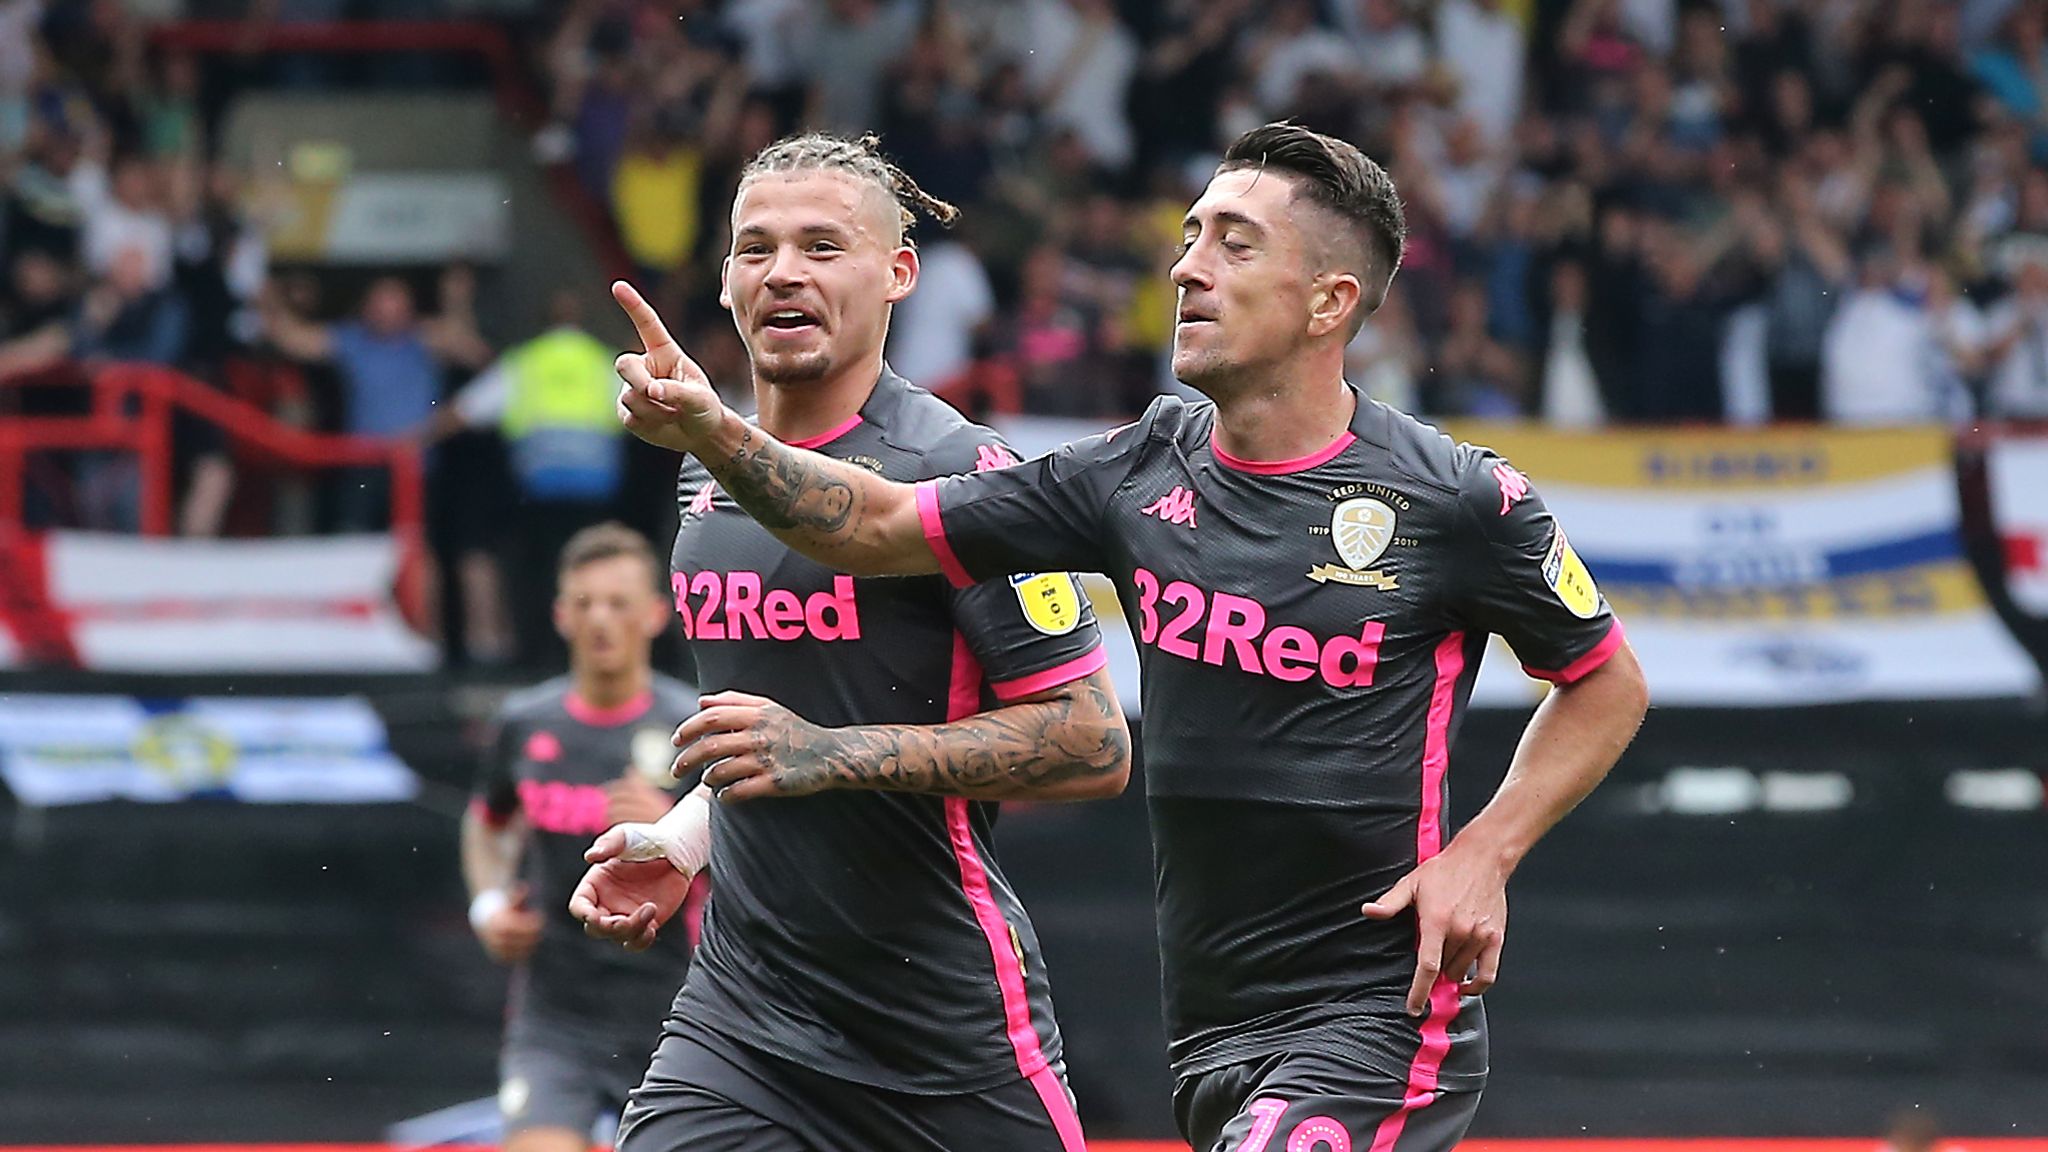 New predicted final Championship table after fresh Leeds United